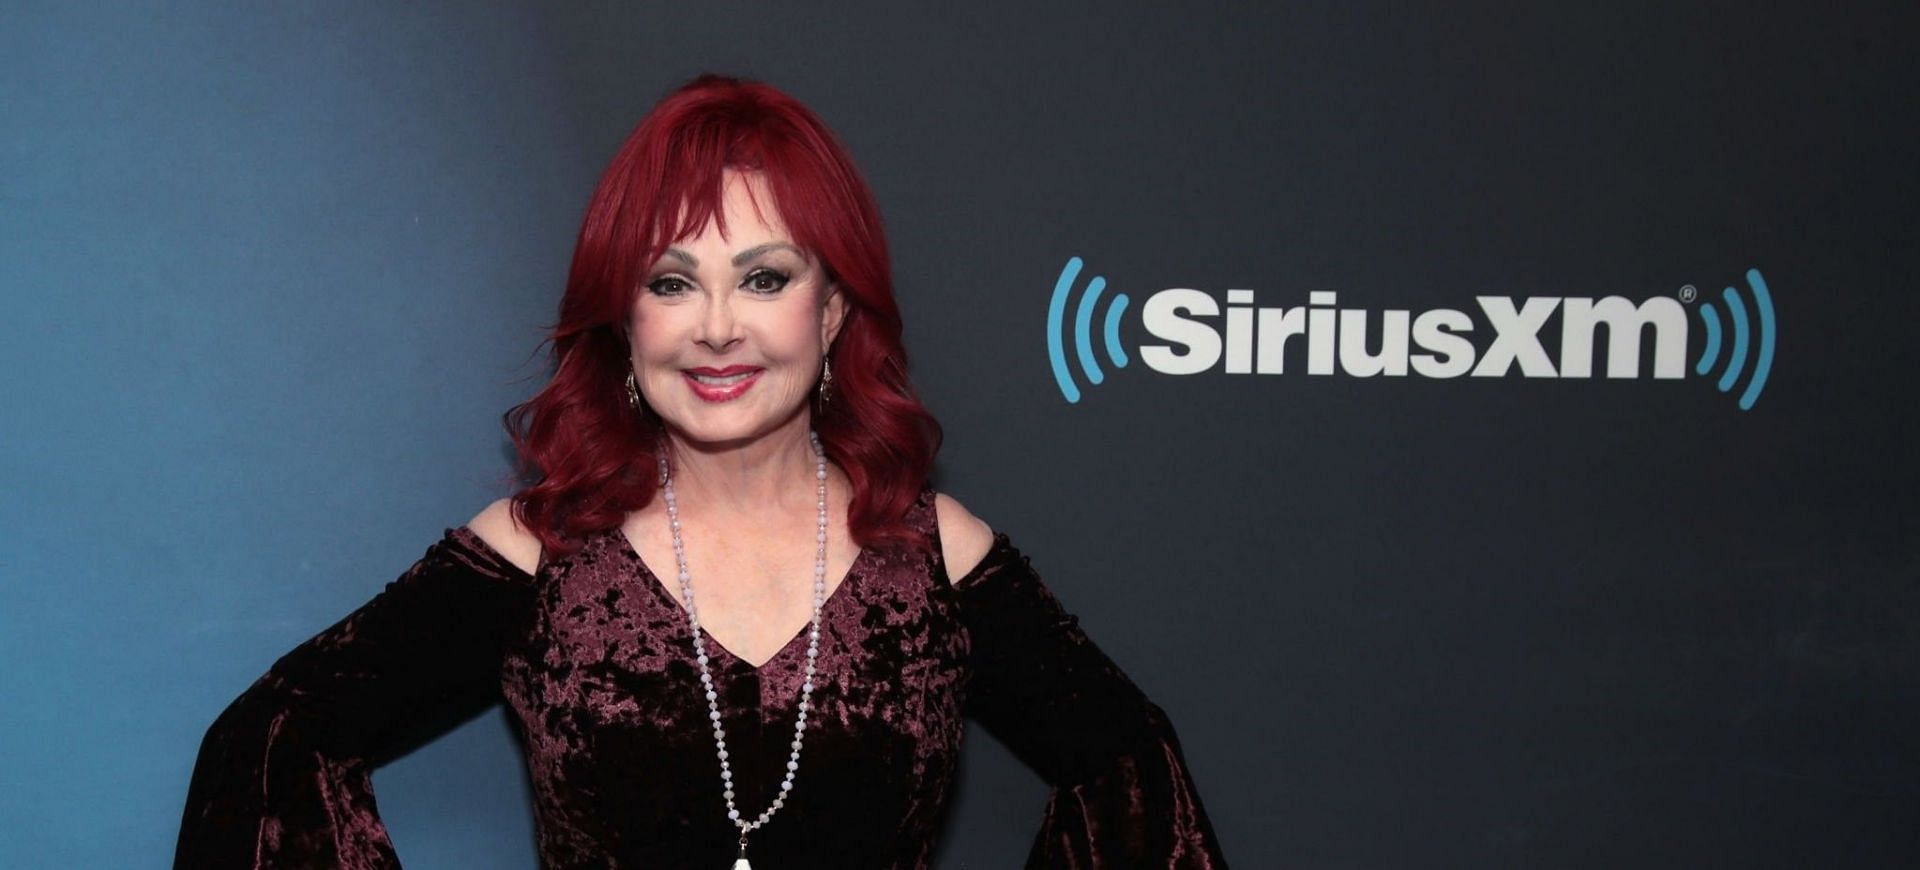 Heartfelt tributes poured in online following the loss of Naomi Judd (Image via Cindy Ord/Getty Images)